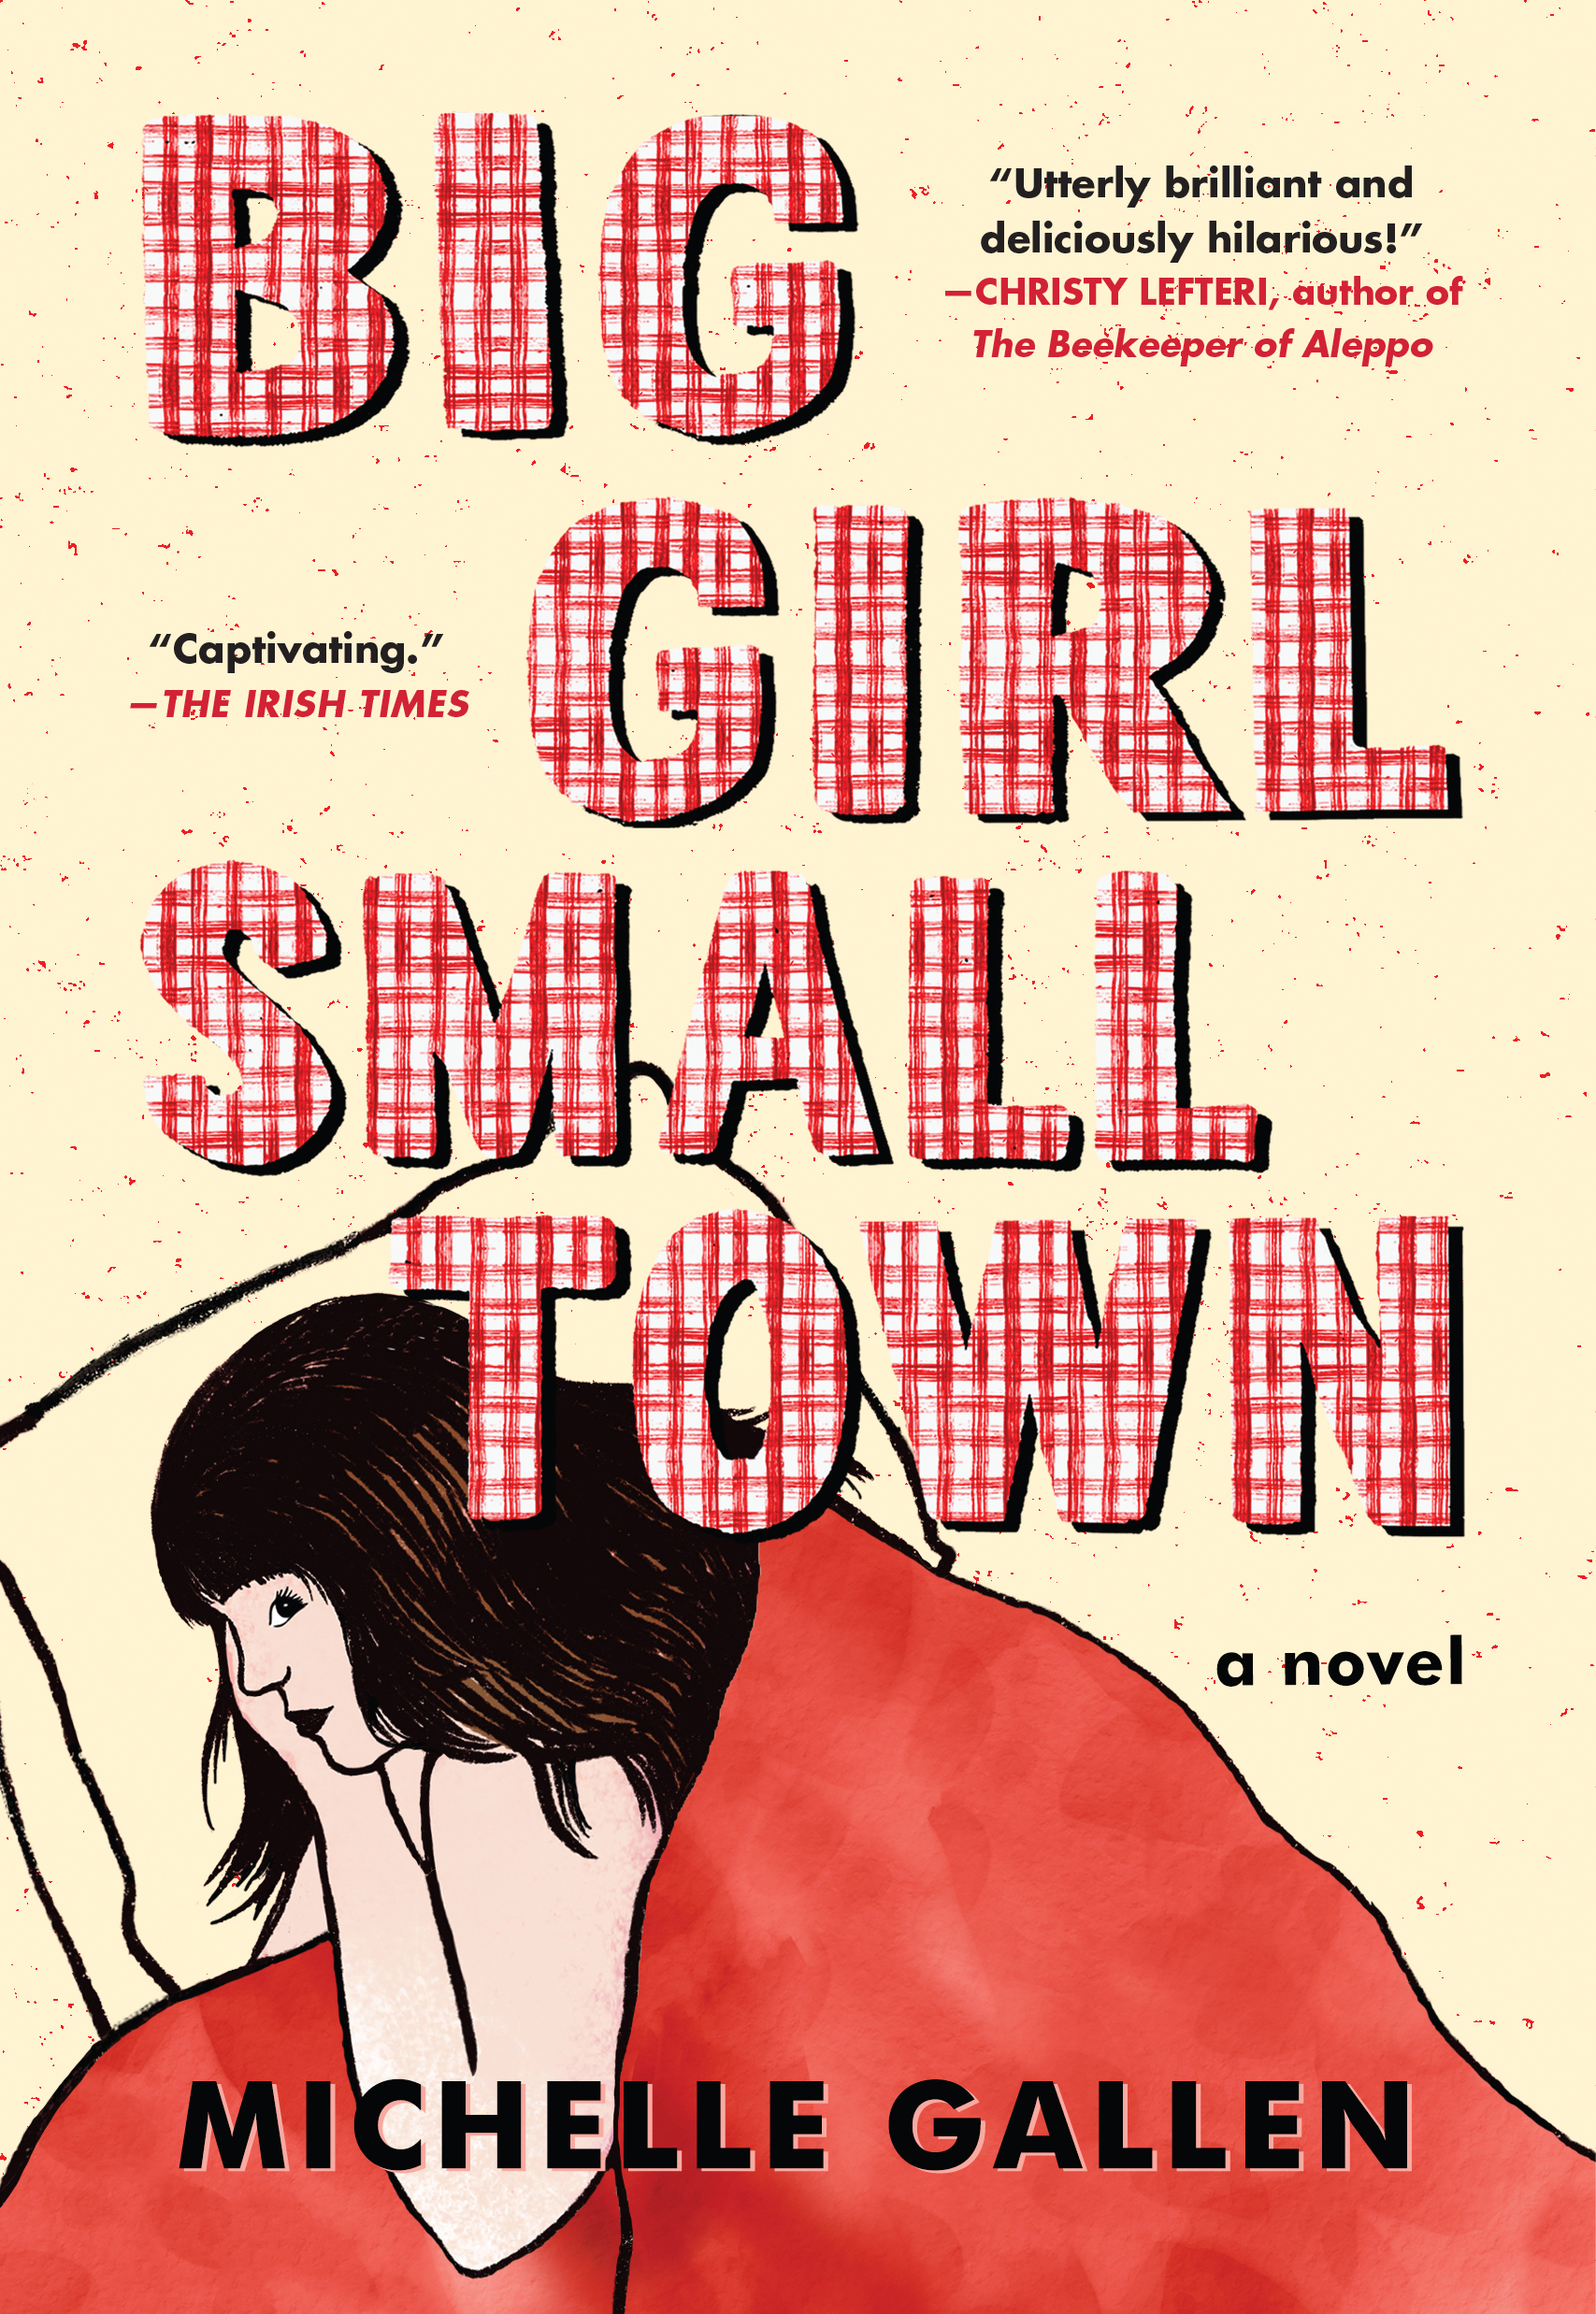 Big Girl, Small Town by Michelle Gallen Hachette Book Group image photo photo